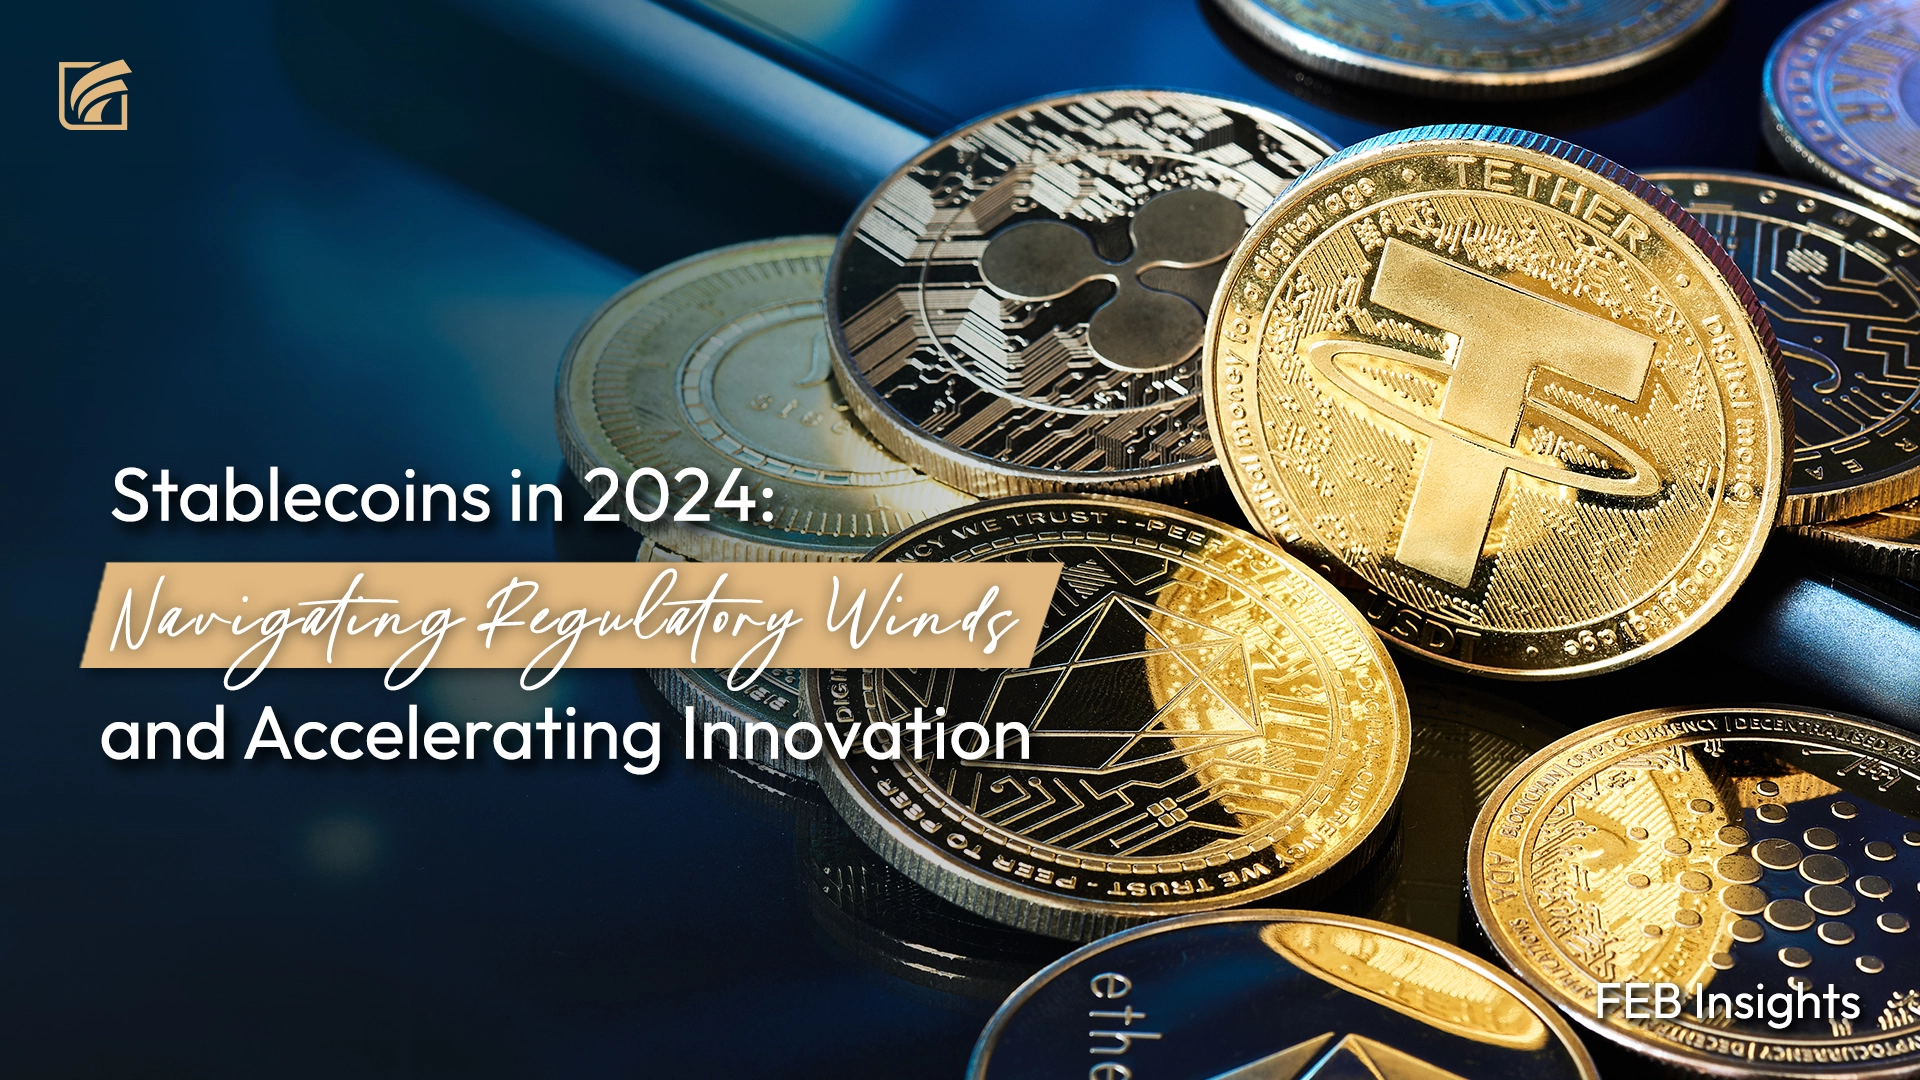 Stablecoins in 2024: Navigating Regulatory Winds and Accelerating Innovation